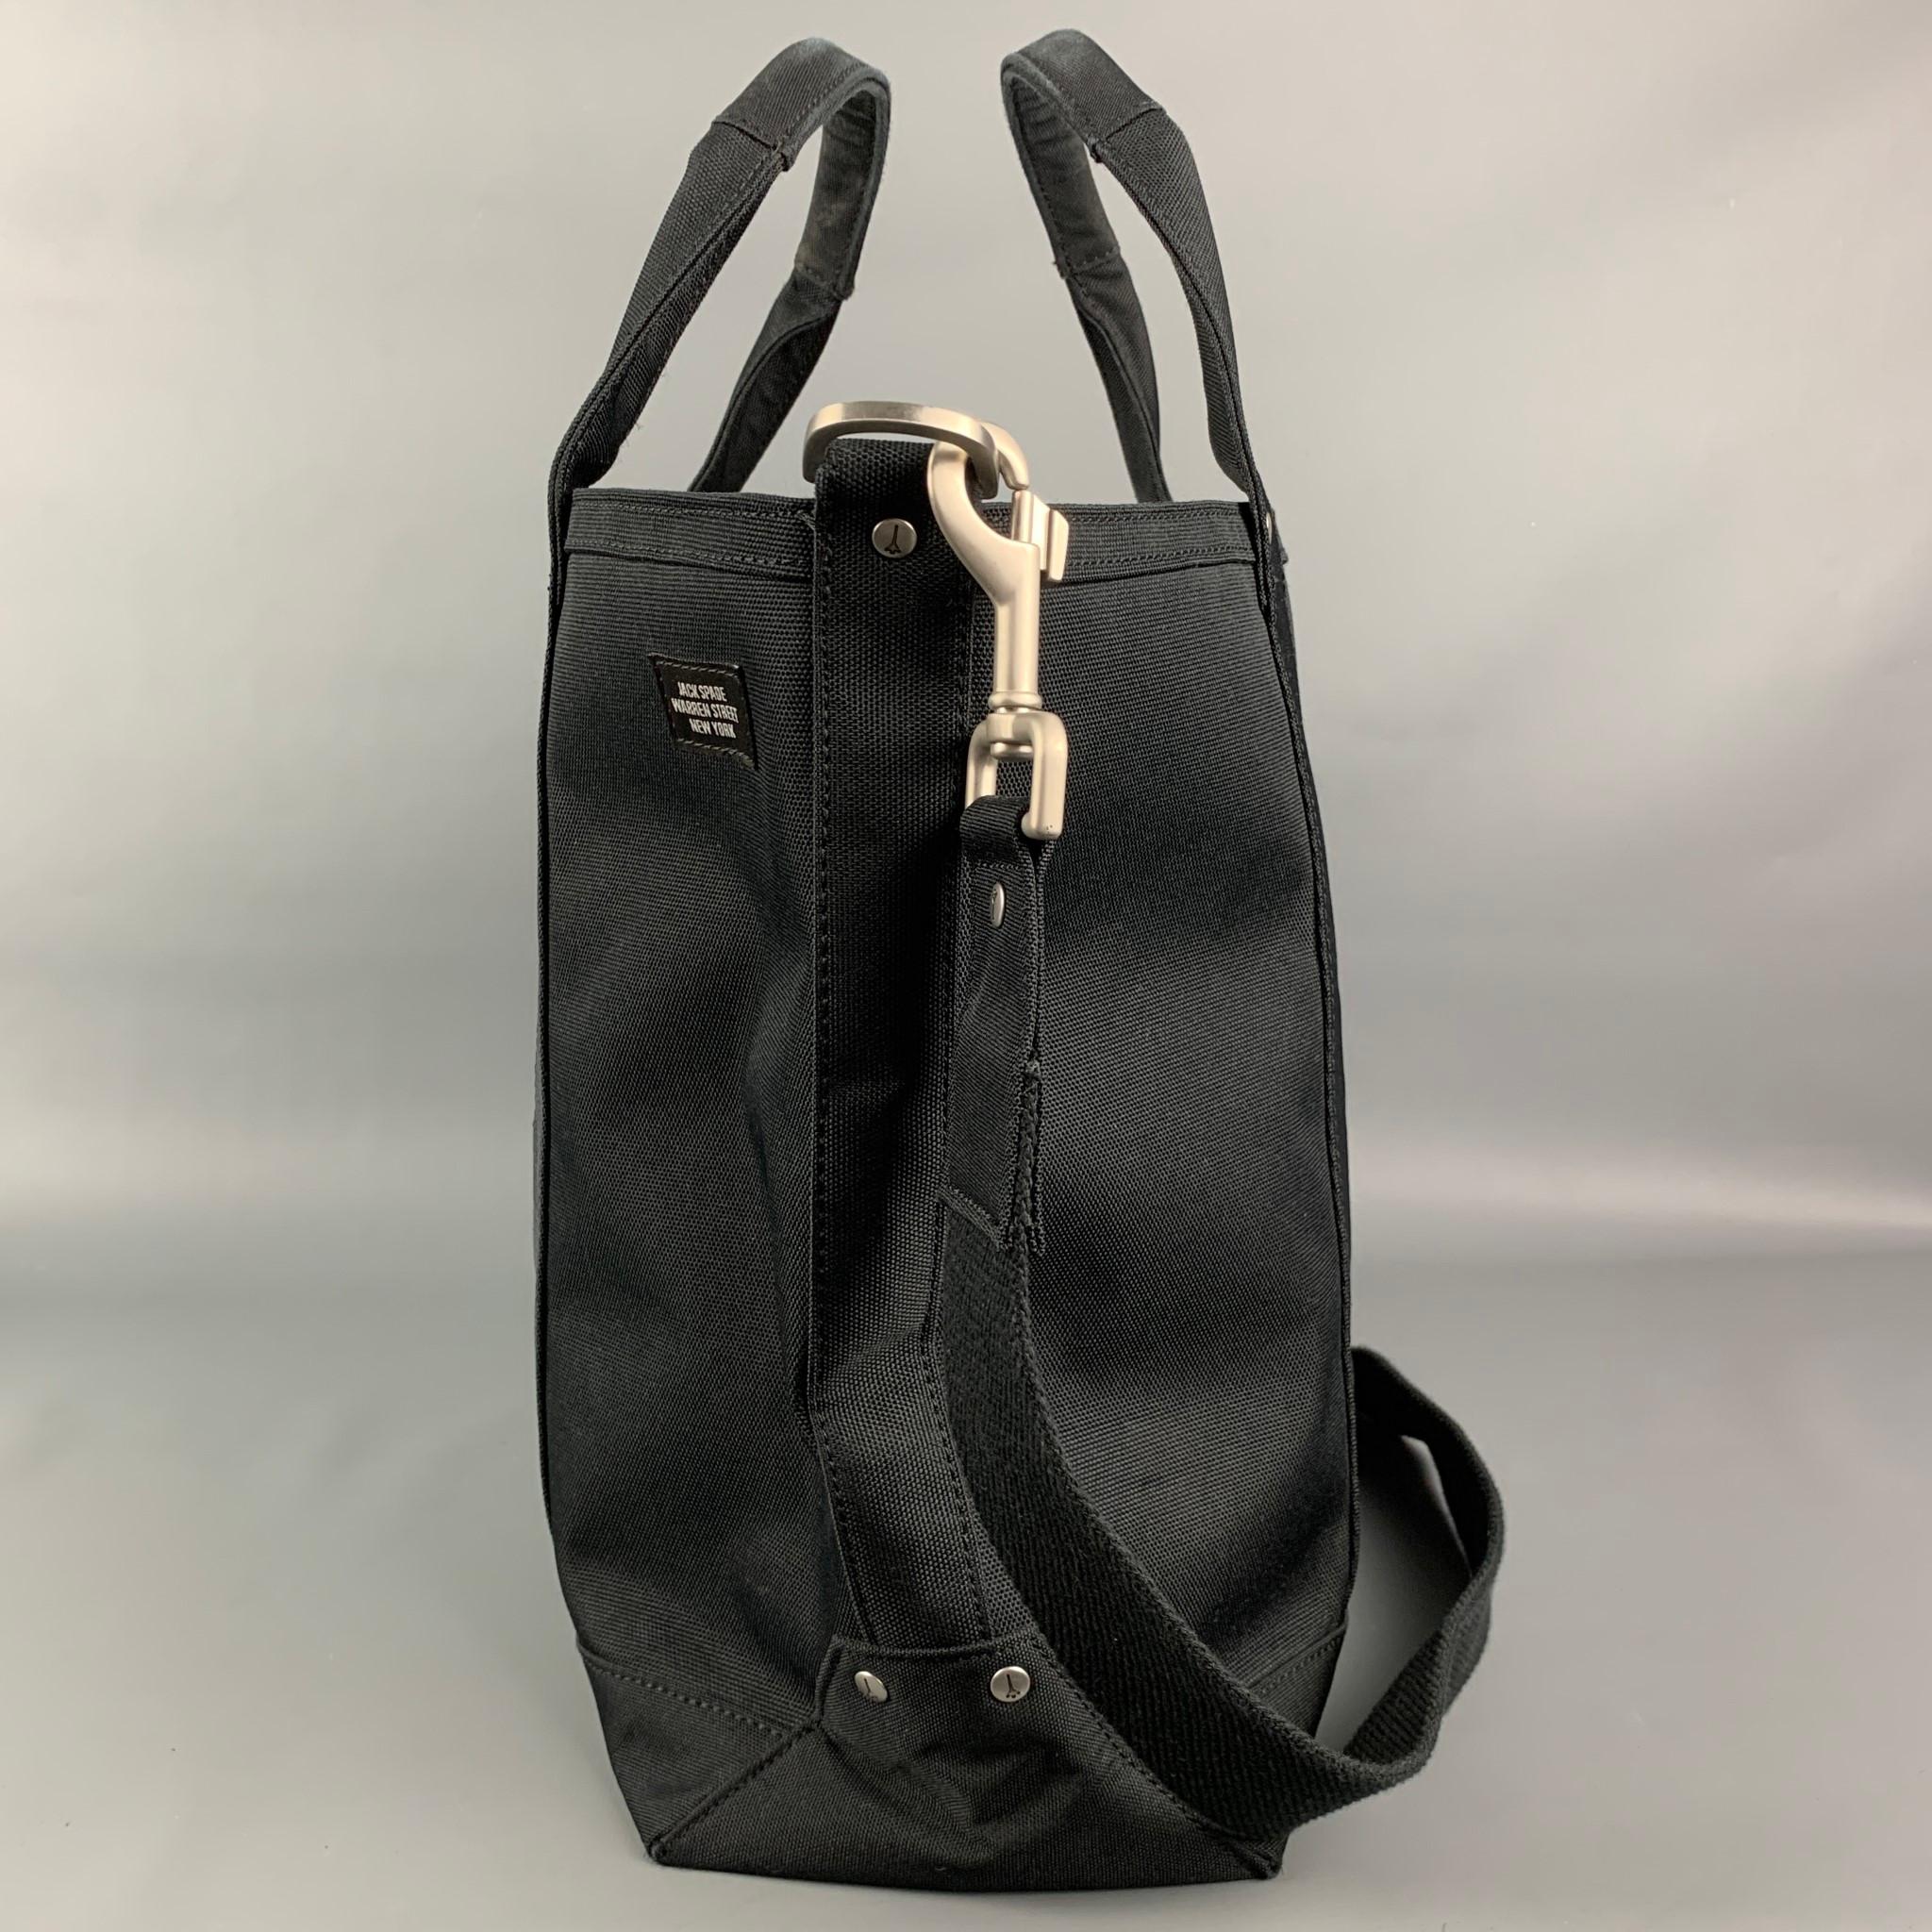 JACK SPADE tote bag comes in a black canvas featuring a tote style, top handles, inner slots, detachable shoulder strap, and a zipper closure. 

Very Good Pre-Owned Condition.

Measurements:

Length: 15 in.
Width: 5.5 in.
Height: 13 in.
Drop: 21 in. 